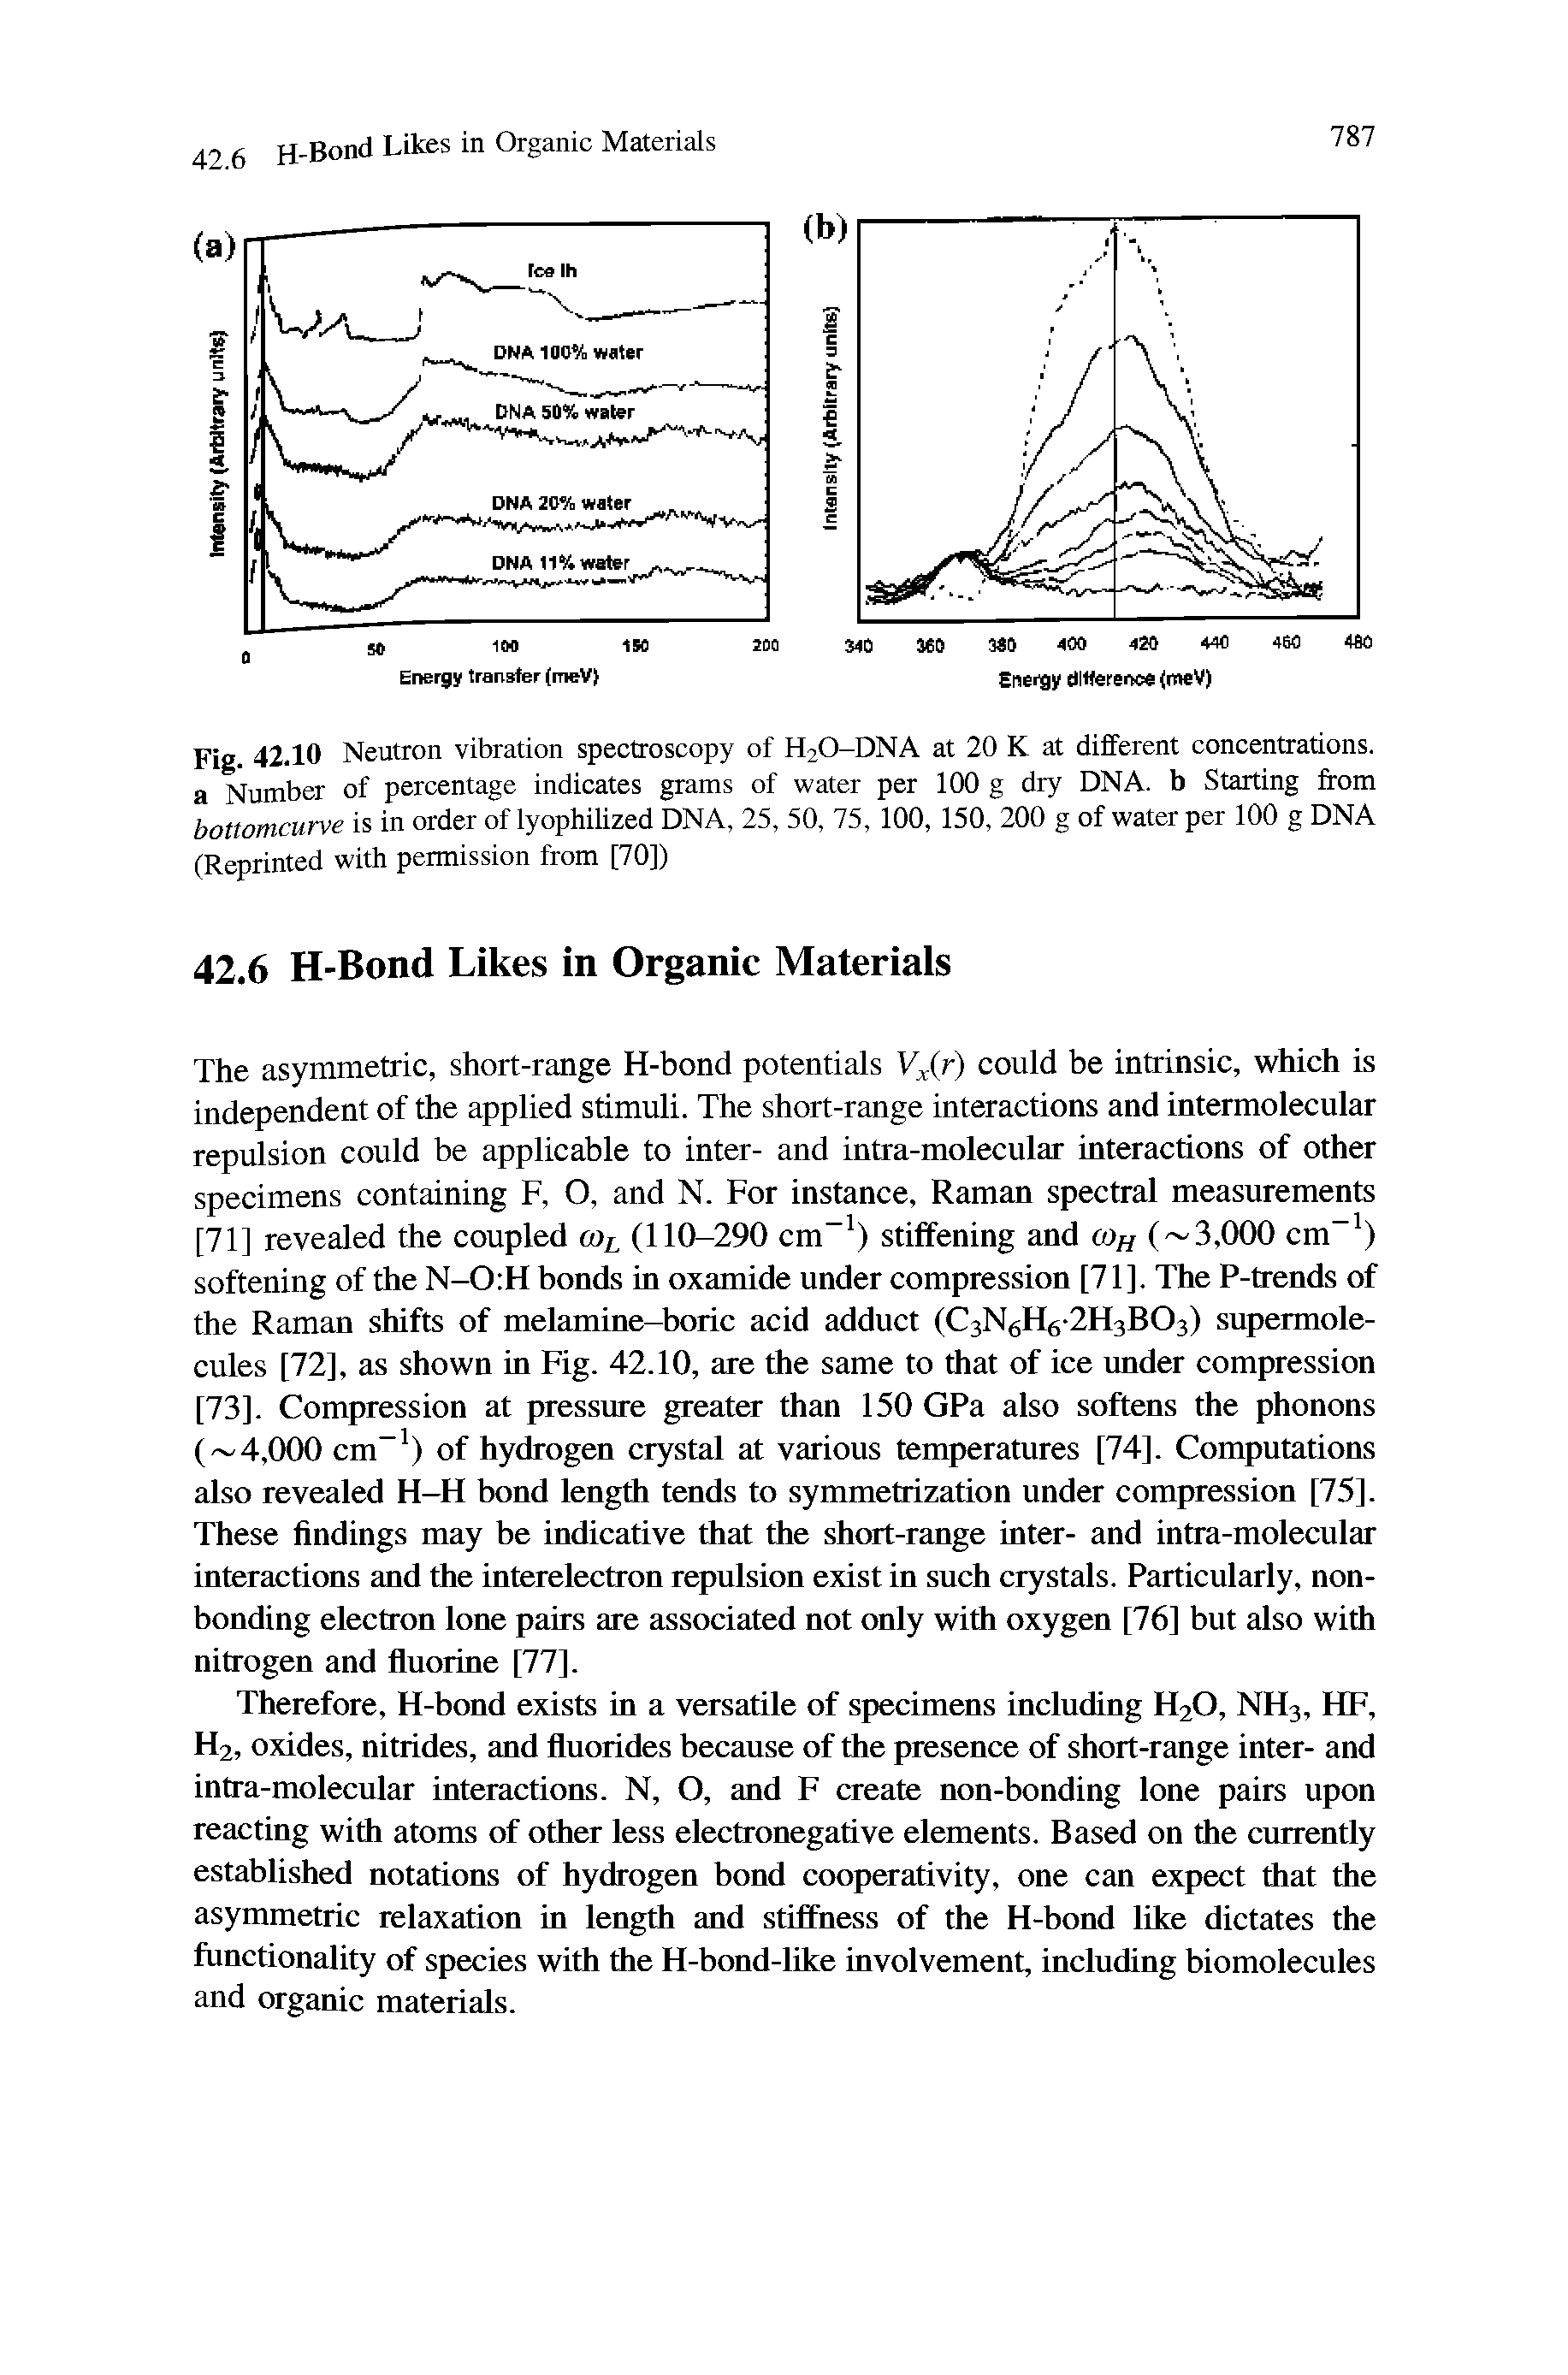 Fig. 42.10 Neutron vibration spectroscopy of H2O-DNA at 20 K at different concentrations, a Number of percentage indicates grams of water per 100 g dry DNA. b Starting from bottomcurve is in order of lyophilized DNA, 25, 50, 75, 100, 150, 200 g of water per 100 g DNA (Reprinted with permission from [70])...